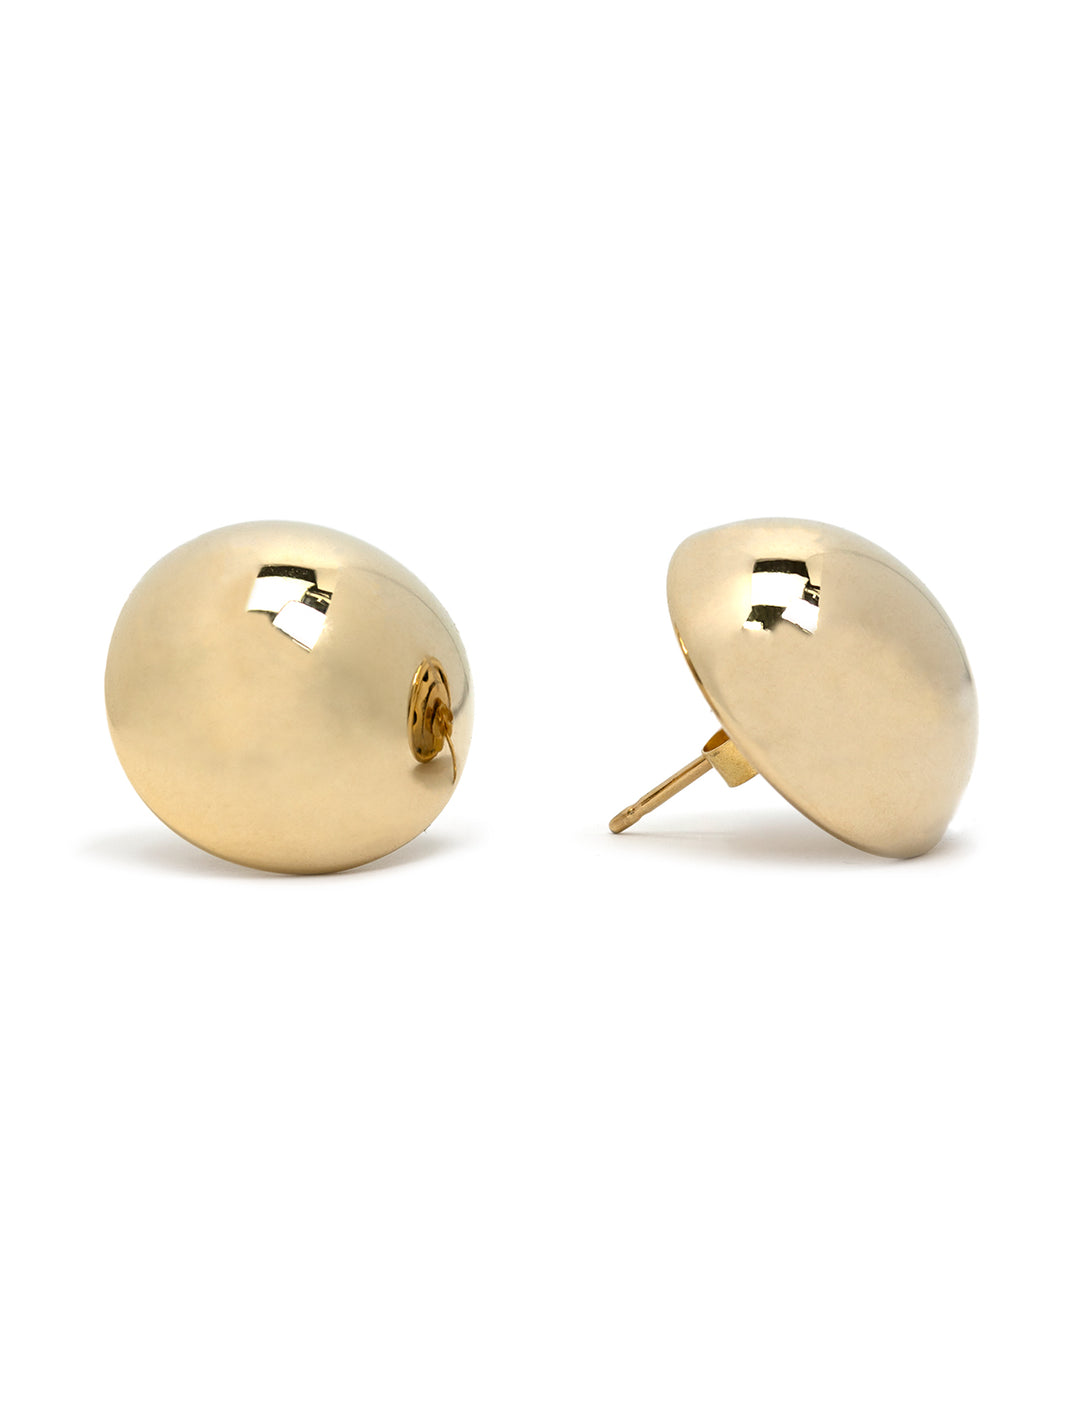 Front view of AV Max's classic small dome earrings.